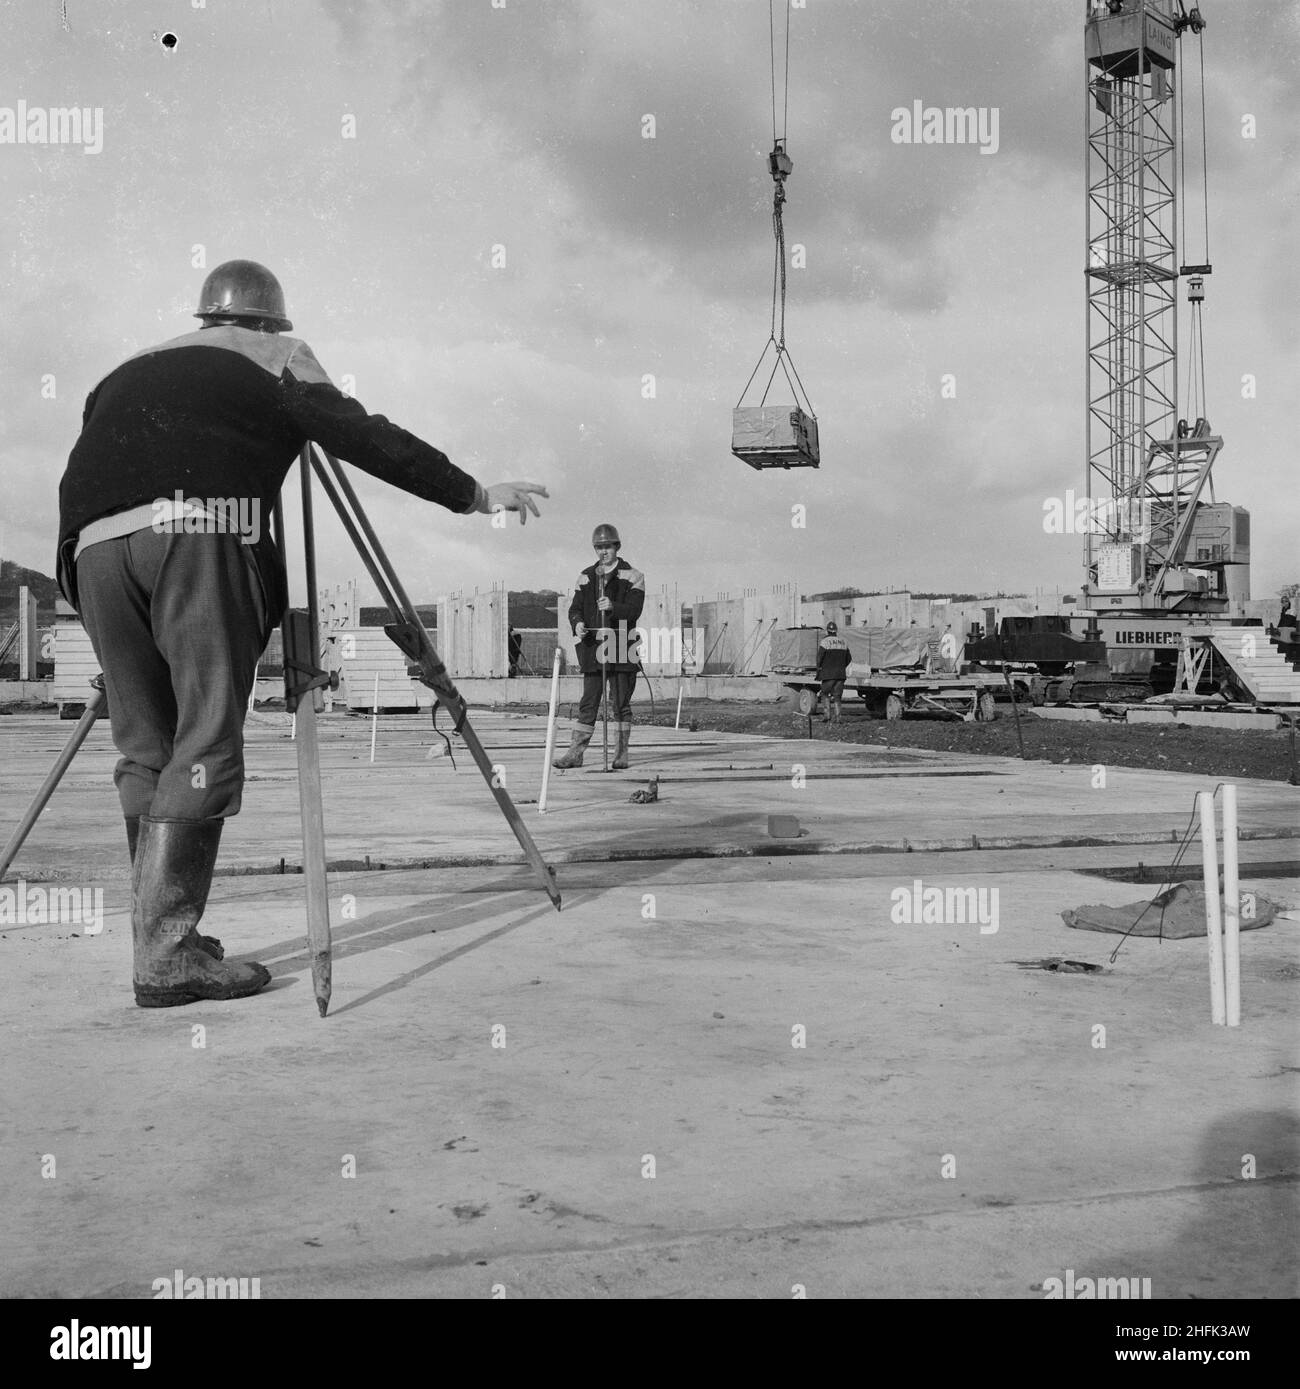 Craigshill, Livingston, West Lothian, Scotland, 01/10/1965. Two surveyors at work on a Jespersen construction compound, probably at the Craigshill development in Livingston, with a crane in the background unloading a pallet from a trailer. In 1963, John Laing and Son Ltd bought the rights to the Danish industrialised building system known as Jespersen (sometimes referred to as Jesperson). The company built factories in Scotland, Hampshire and Lancashire producing Jespersen prefabricated parts and precast concrete panels, allowing the building of housing to be rationalised, saving time and mone Stock Photo